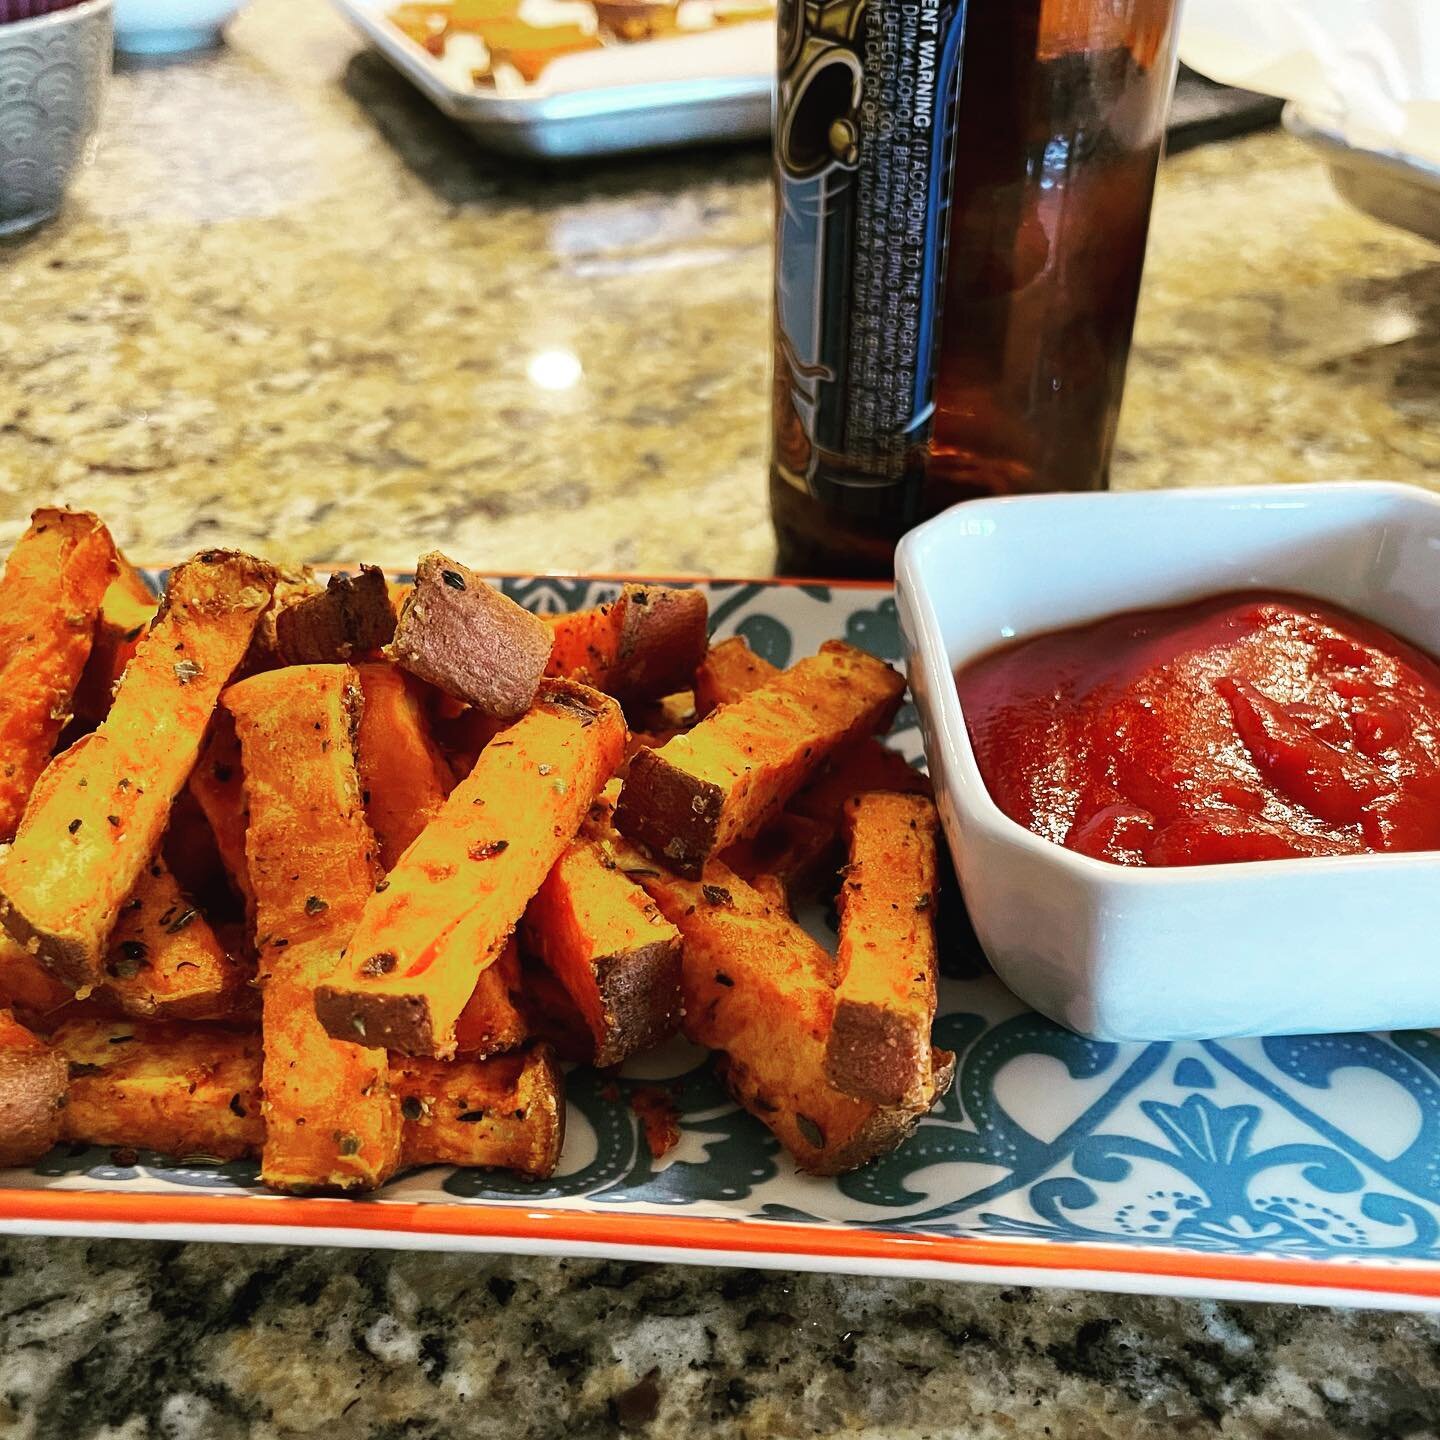 Sweet Potato Fries with Scratch Made Ketchup!  We added some of last weeks Creole seasoning for those who like spice. #cajunfries #healthyfries #kidswithautismcan #kidscancook #yummy #ketchup